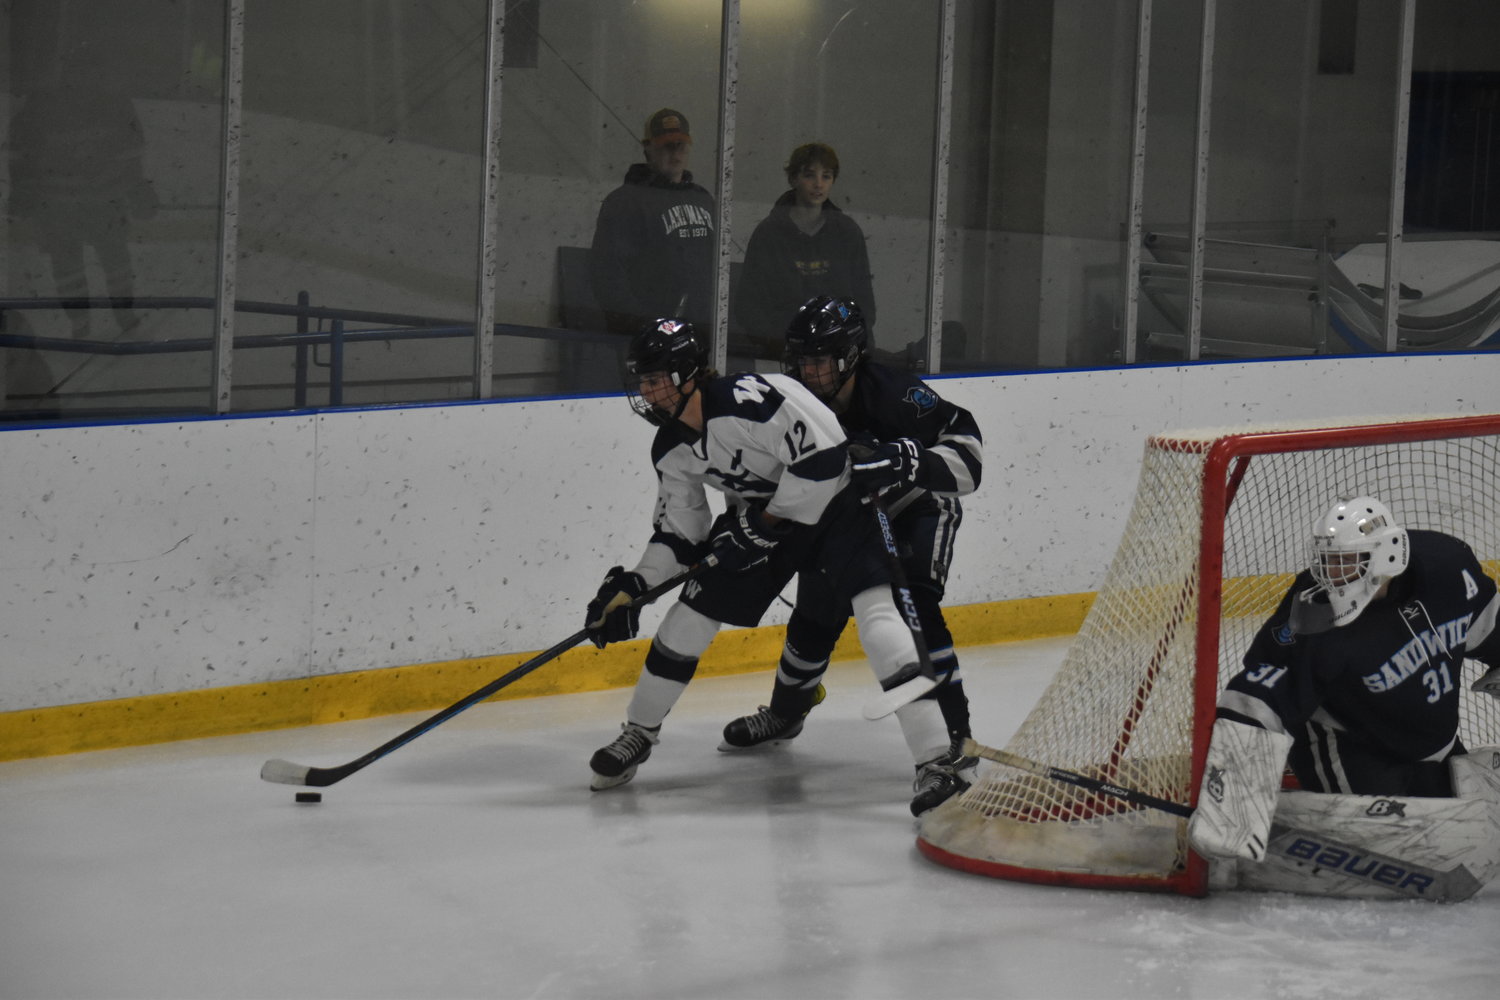 Ryan Davis works the puck around the back of the net during last Thursday’s game against Sandwich.